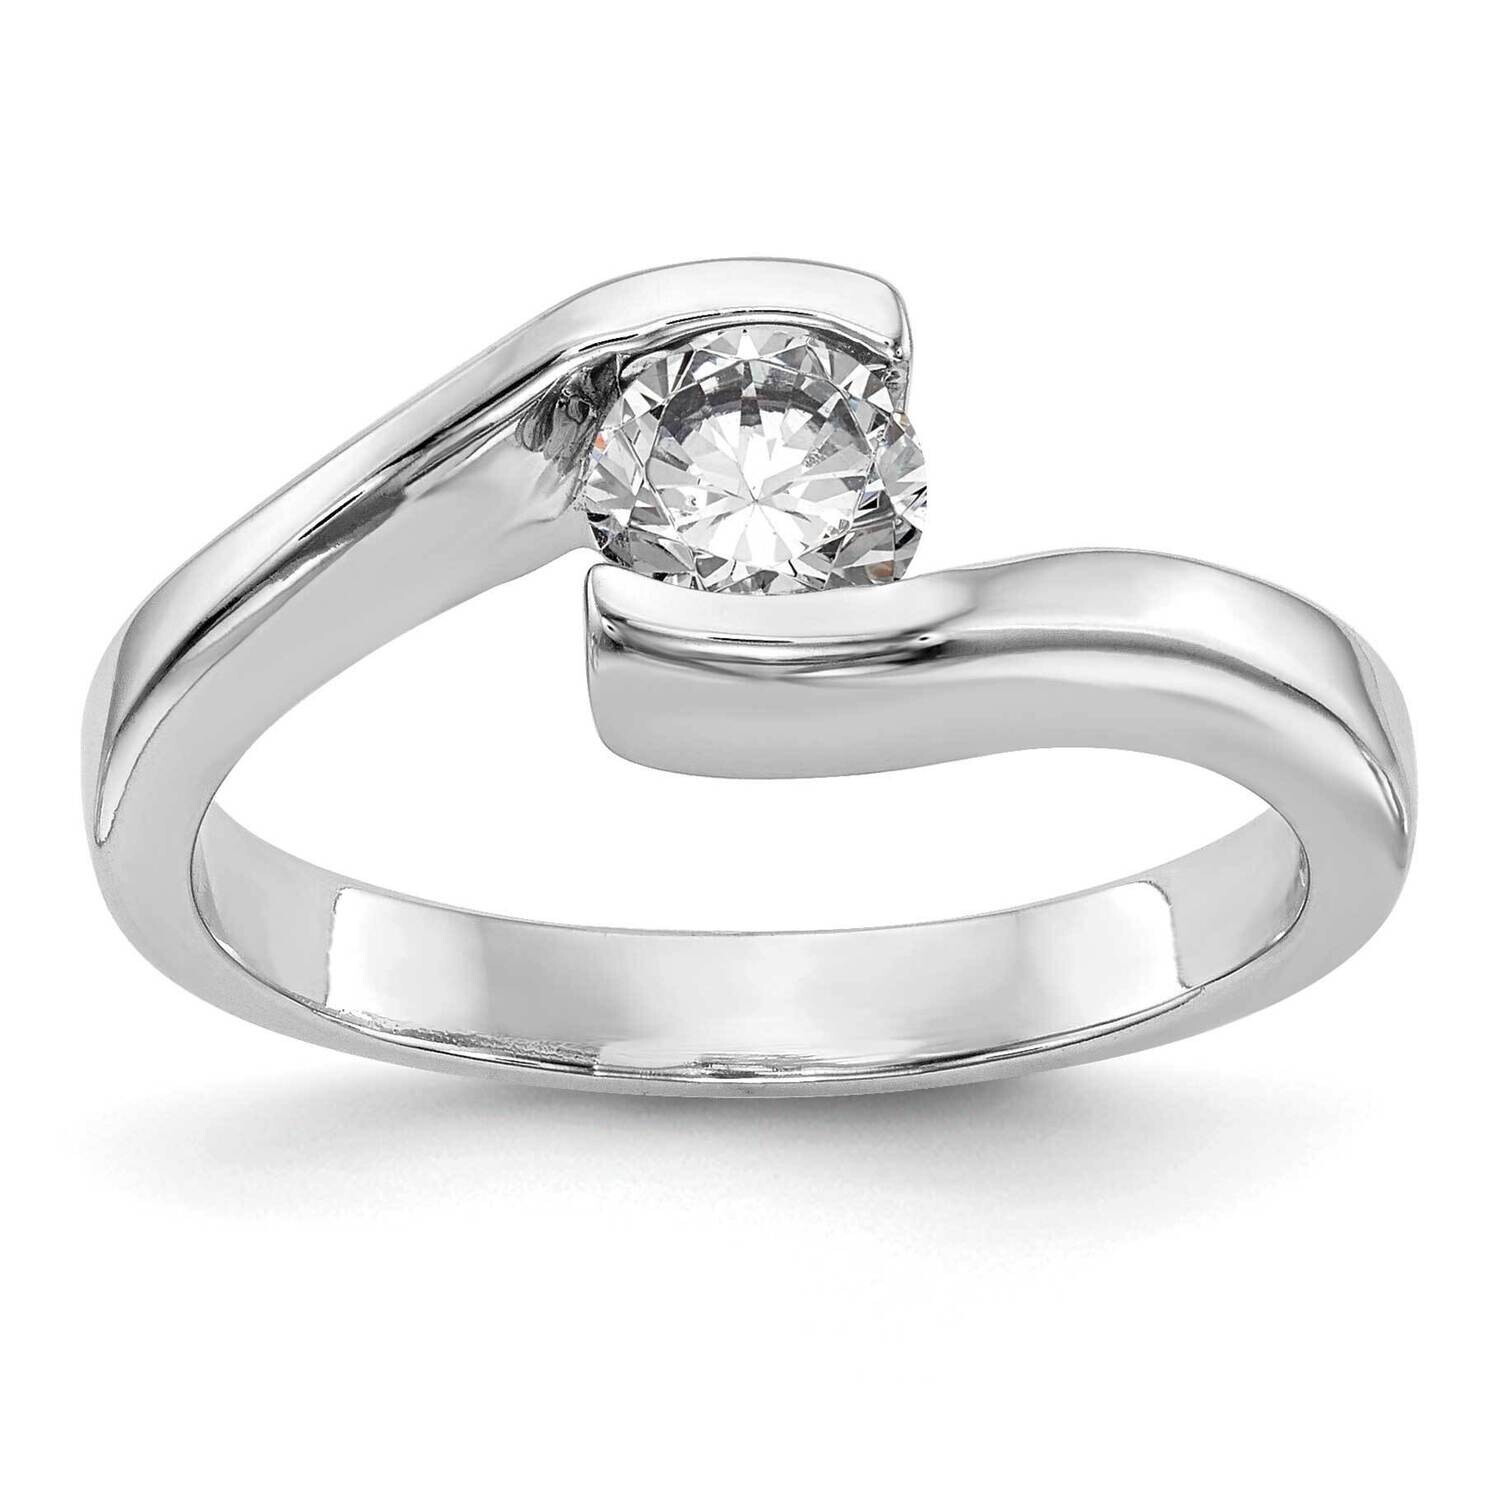 Holds 1/2 Carat 5.00mm Round Half-Bezel Bypass Solitaire Engagement Ring Mounting 14k White Gold RM2019E-5.0MM-CWAA